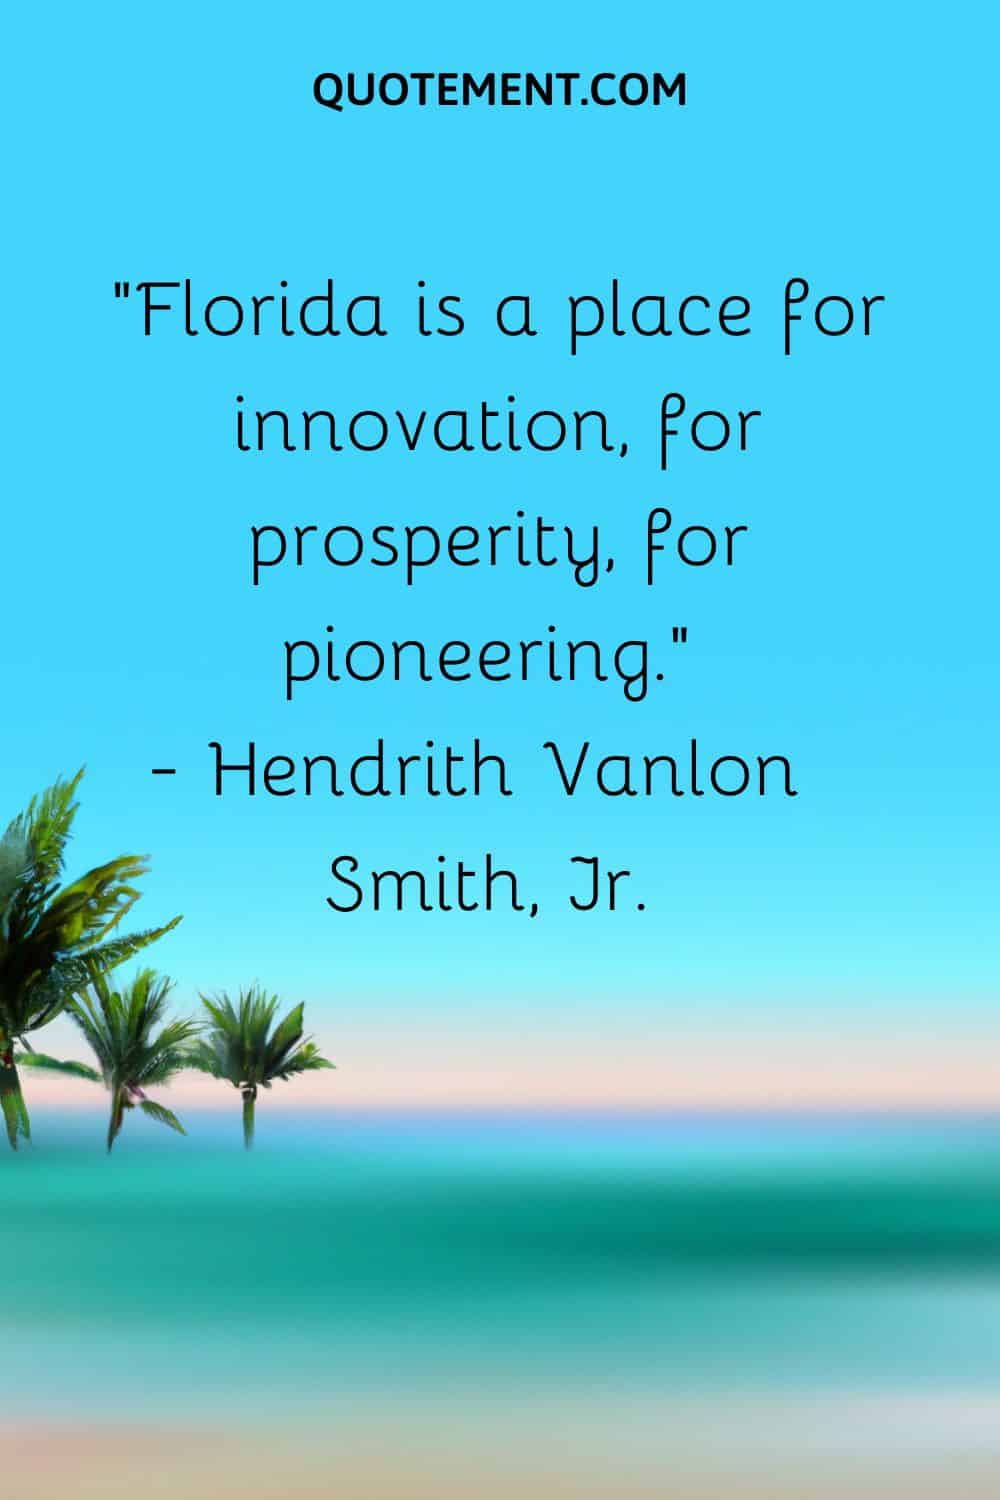 Florida is a place for innovation, for prosperity, for pioneering